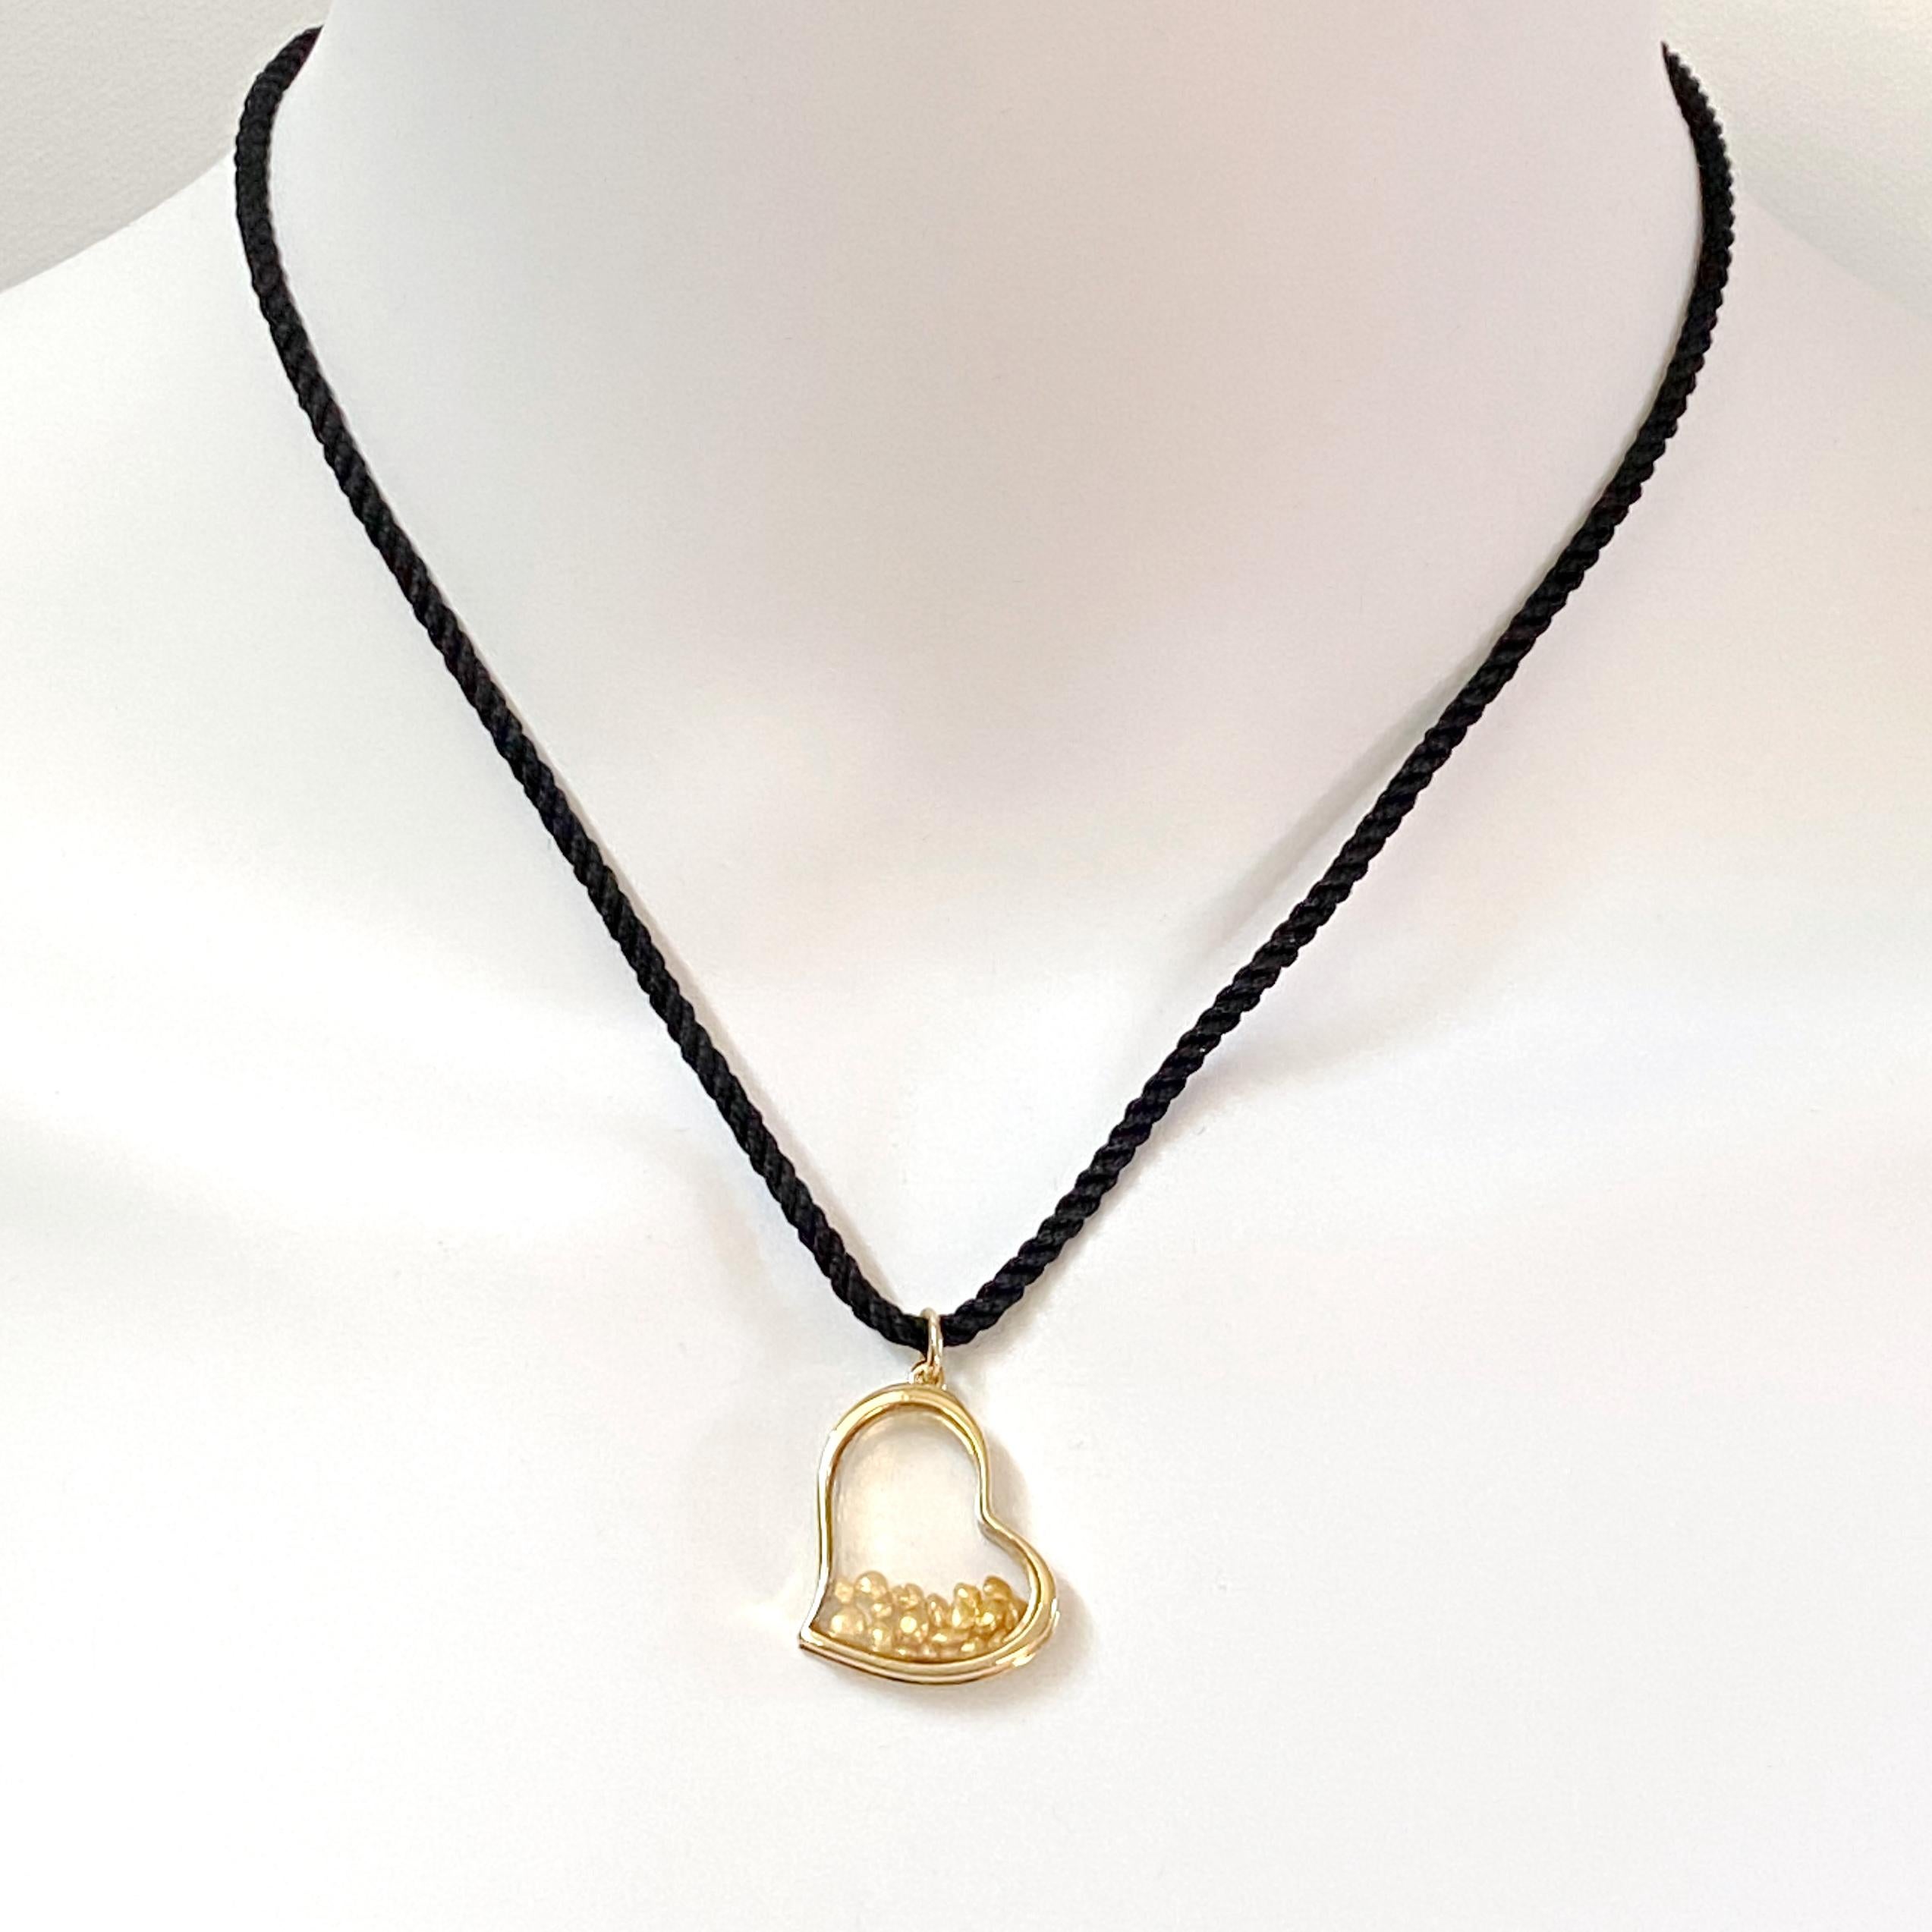 This custom pendant features almost 2 grams of tiny pure gold nuggets moving freely inside a heart-shaped pendant.  Eytan Brandes made exactly two of these -- one with diamonds, for a customer, and this one.  It's a great piece, and it doesn't have